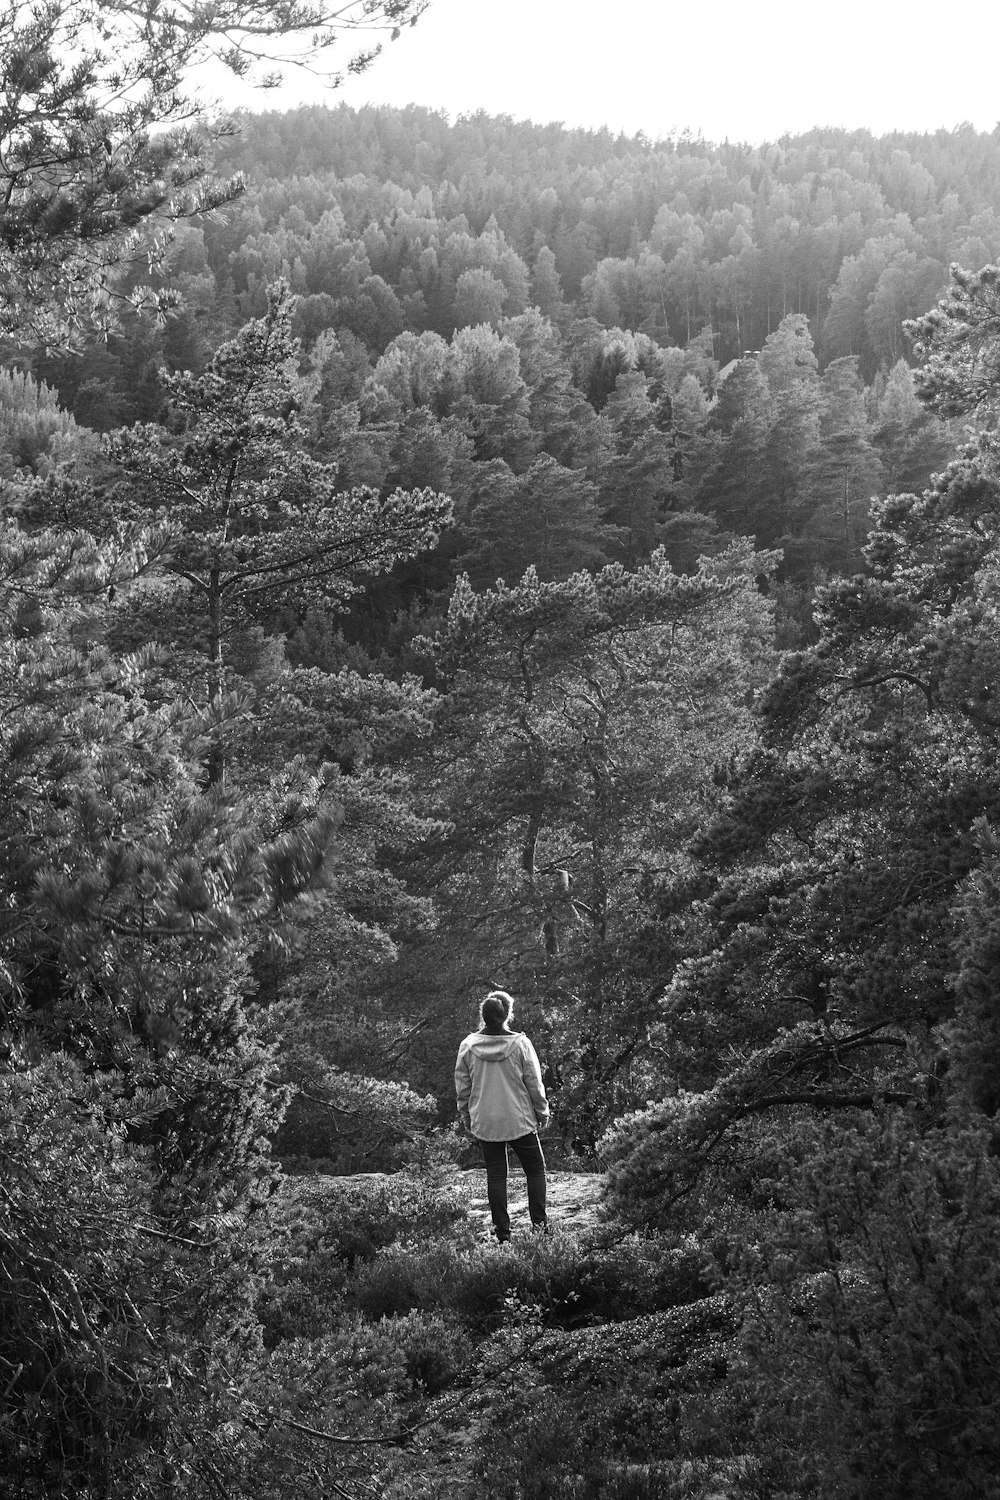 grayscale photo of man in black jacket and pants walking on pathway surrounded by trees